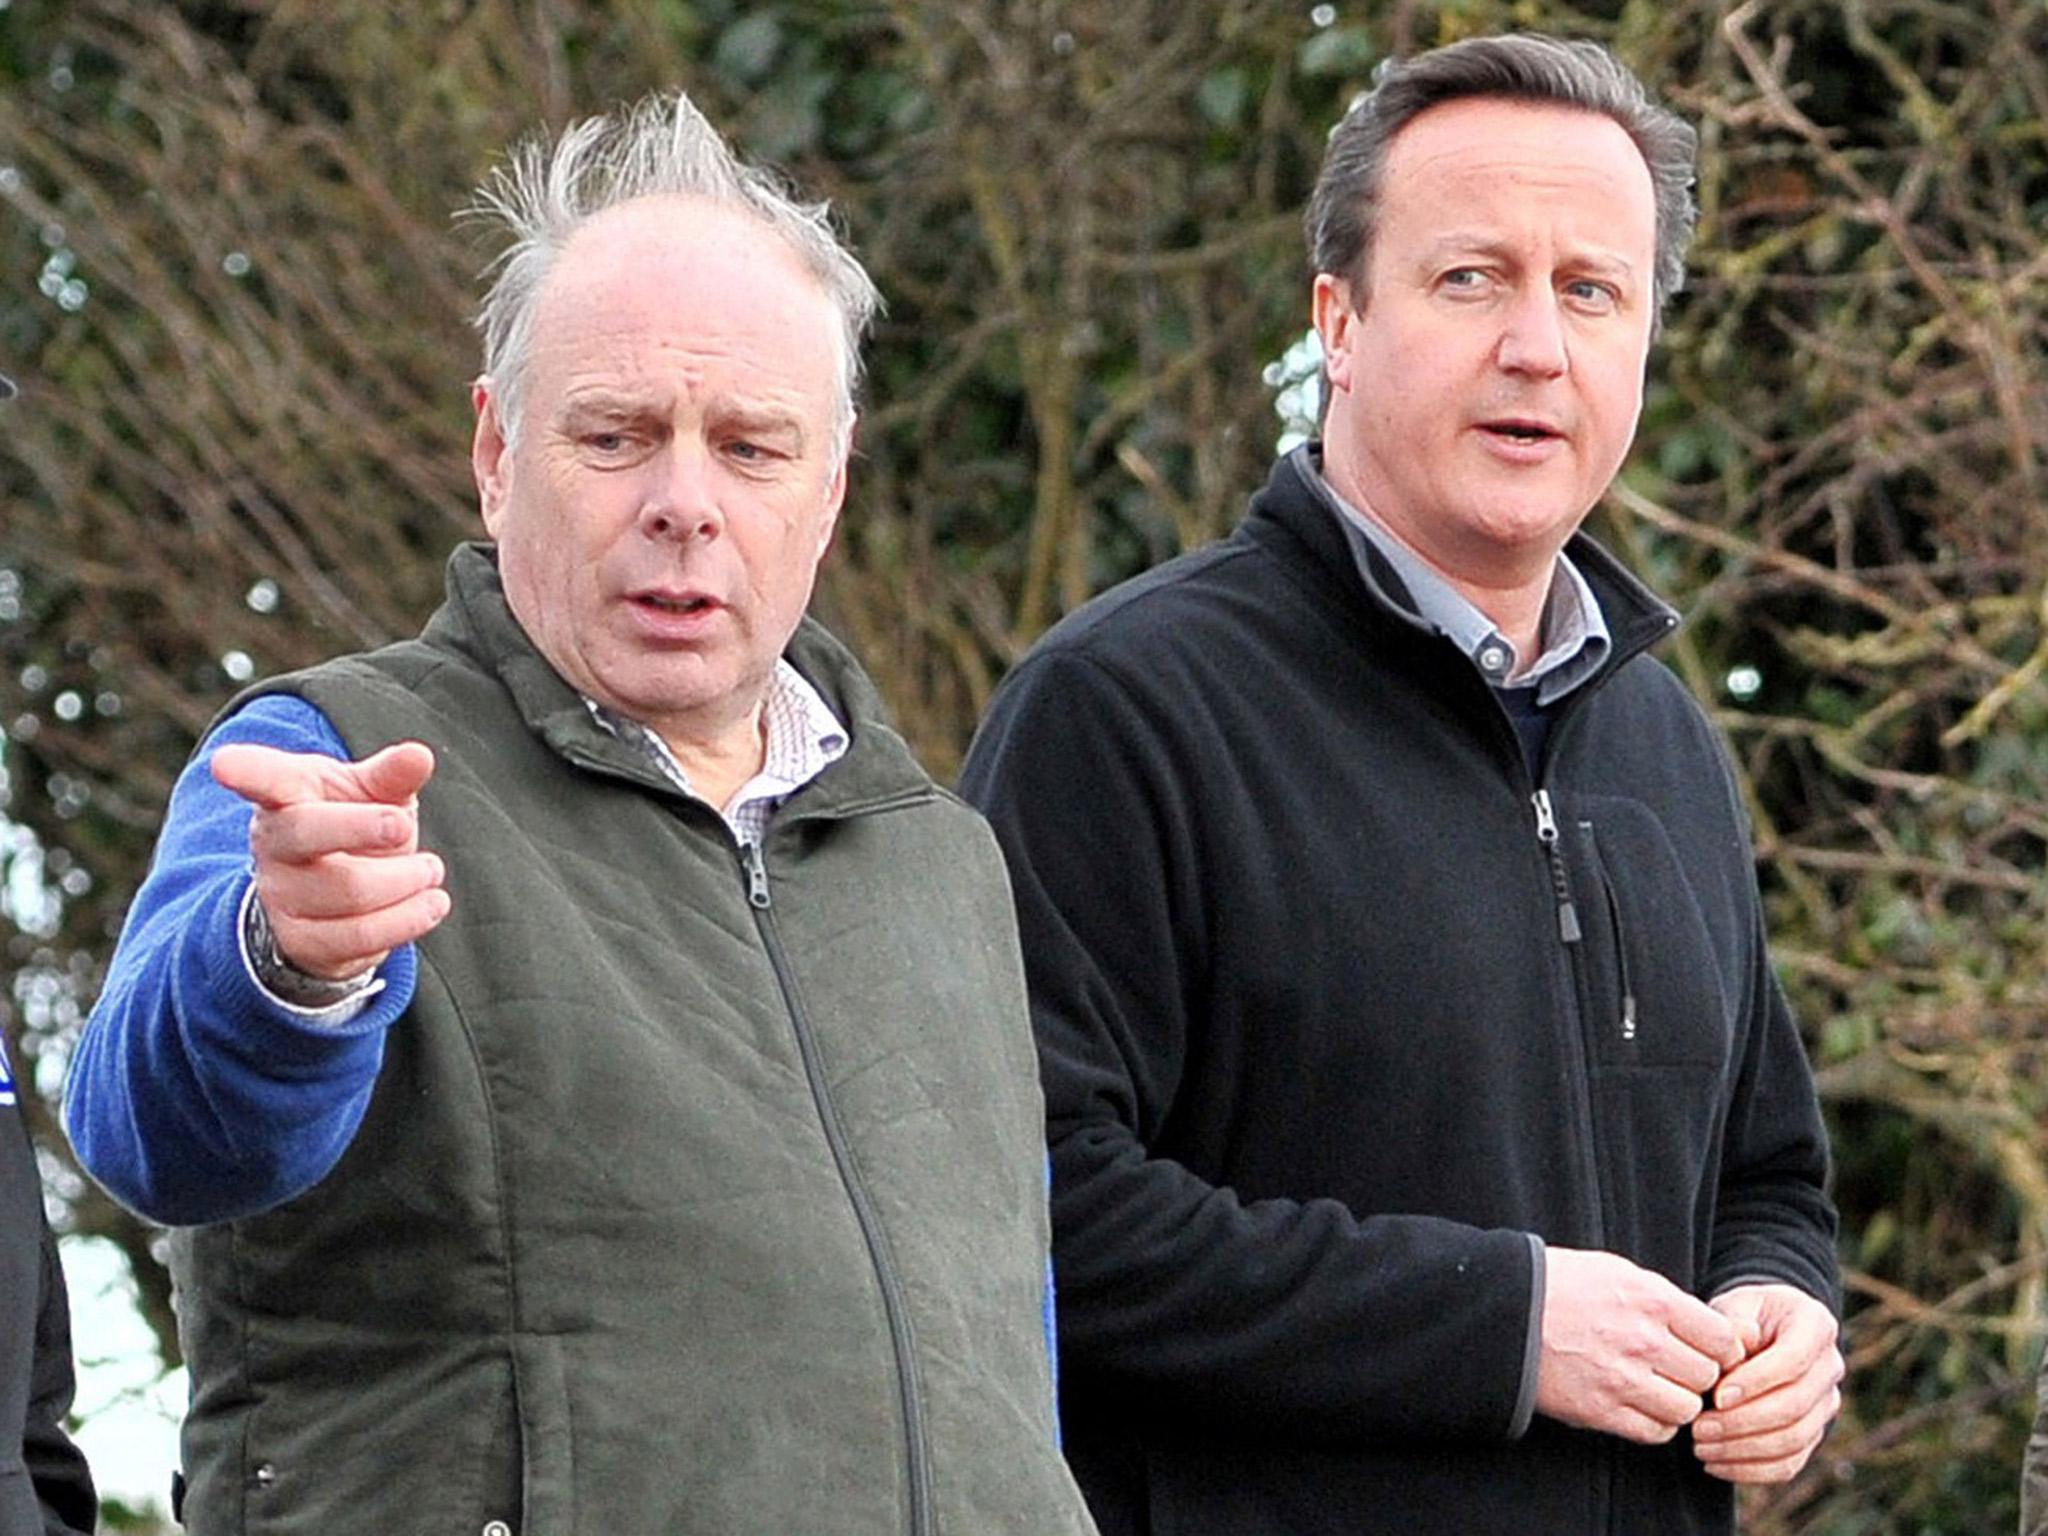 Ian Liddell-Grainger MP with the Prime Minister during a visit to the Somerset Levels last Winter